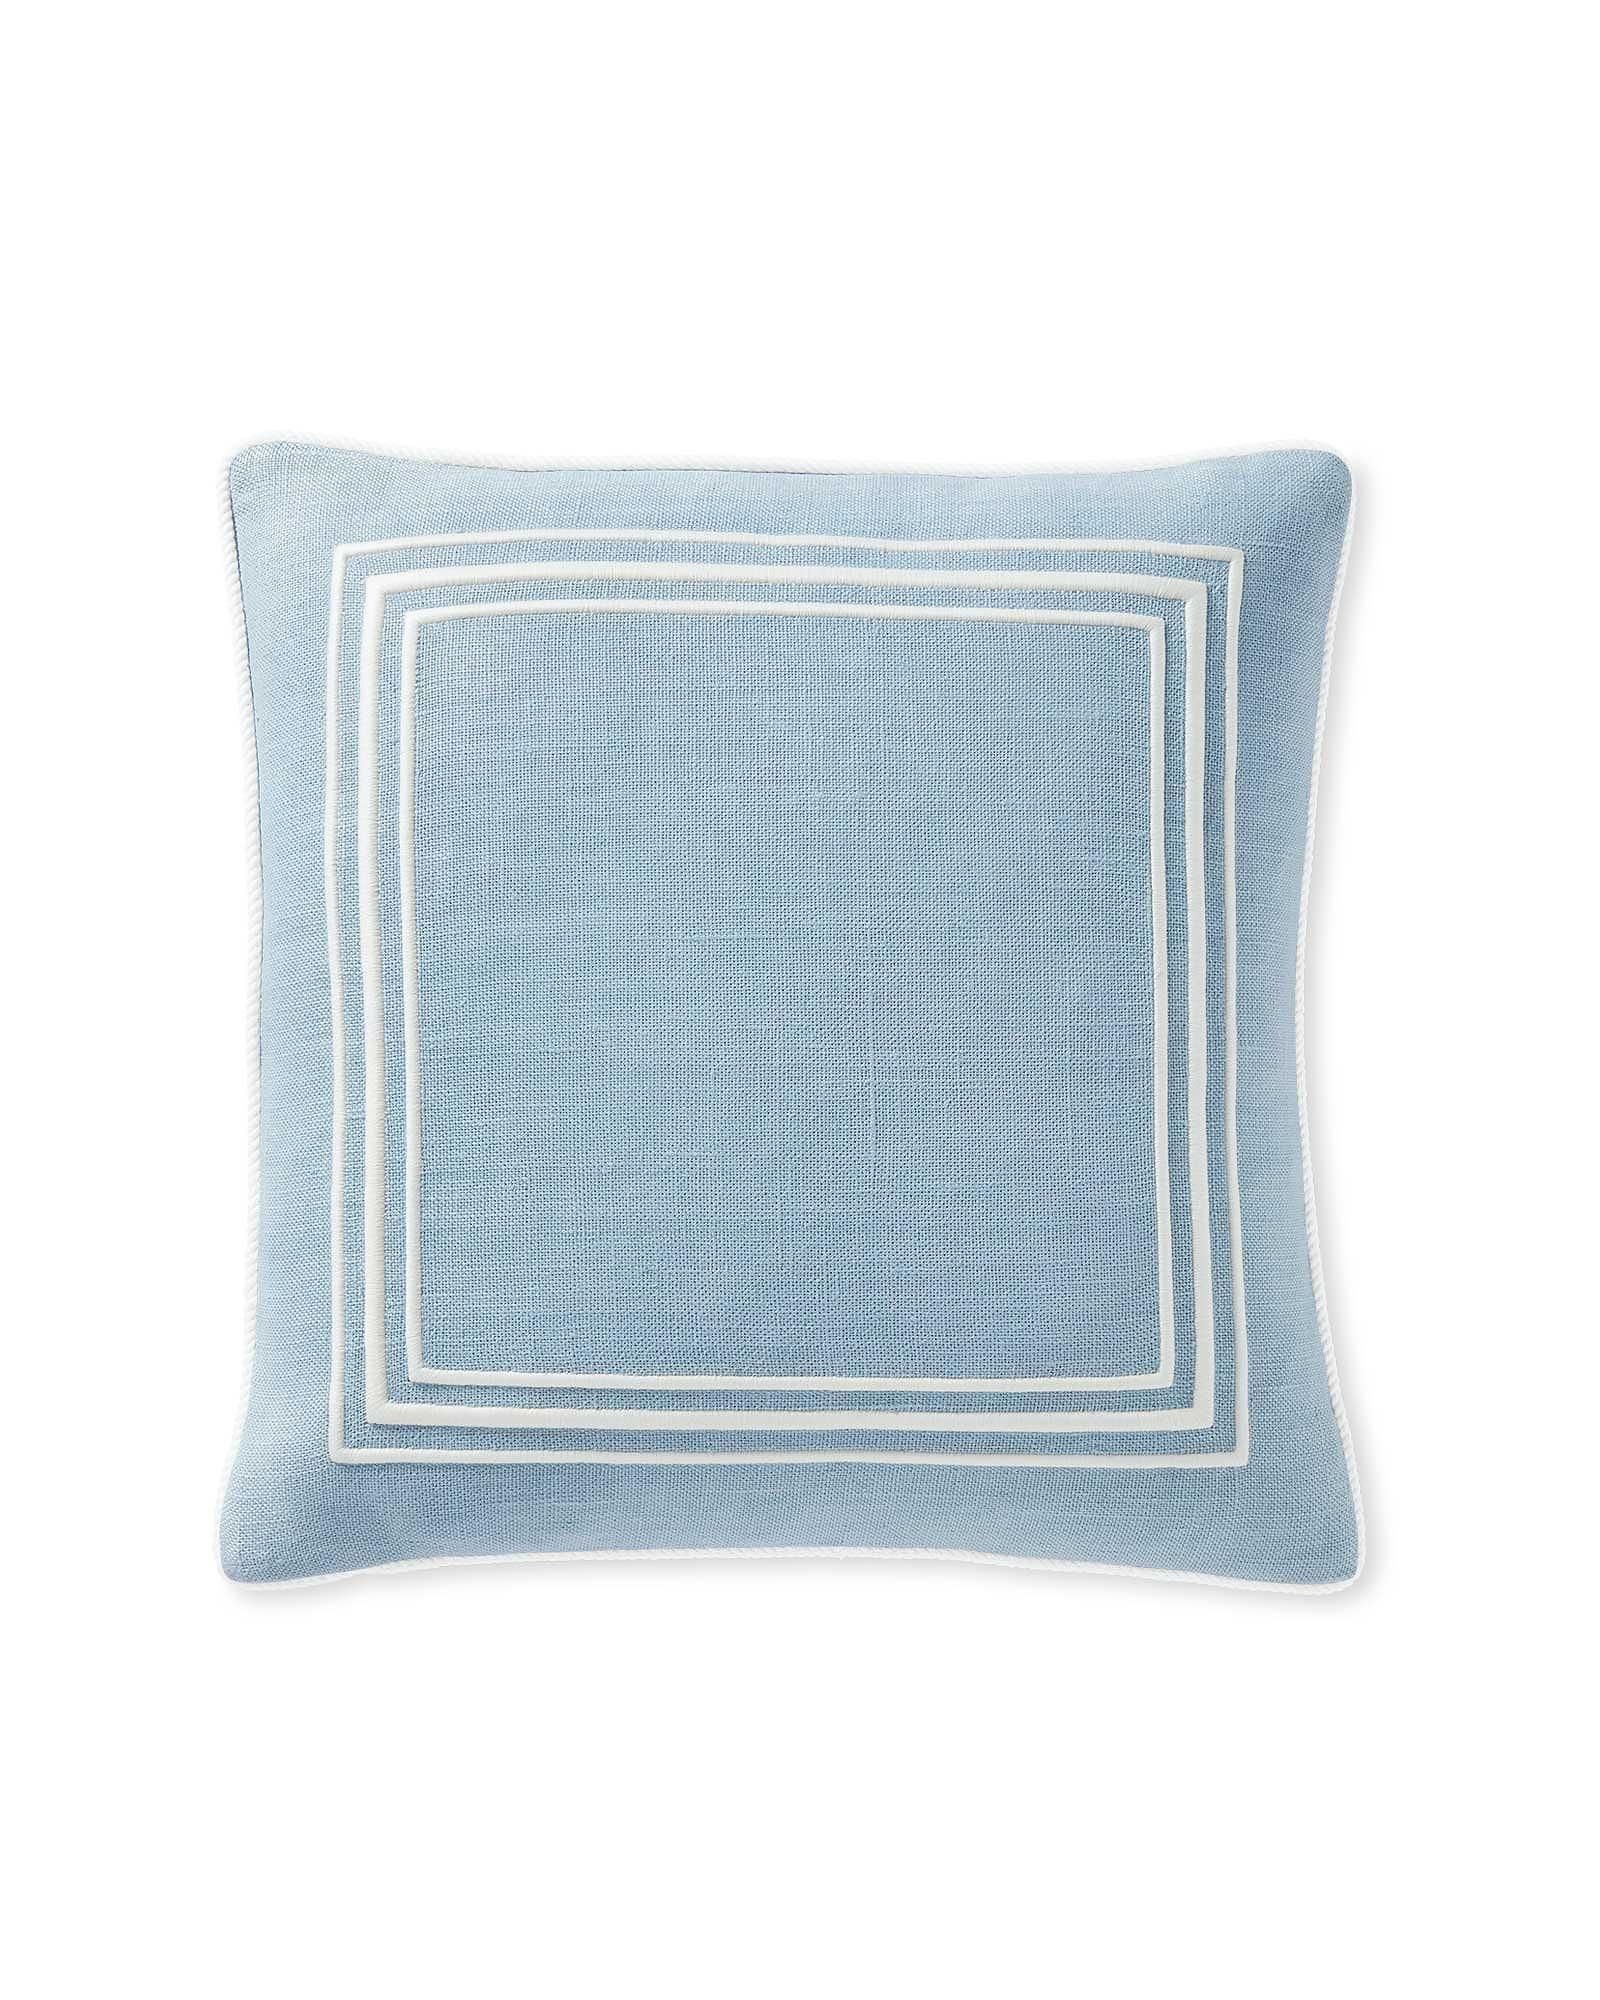 Riva Pillow Cover | Serena and Lily